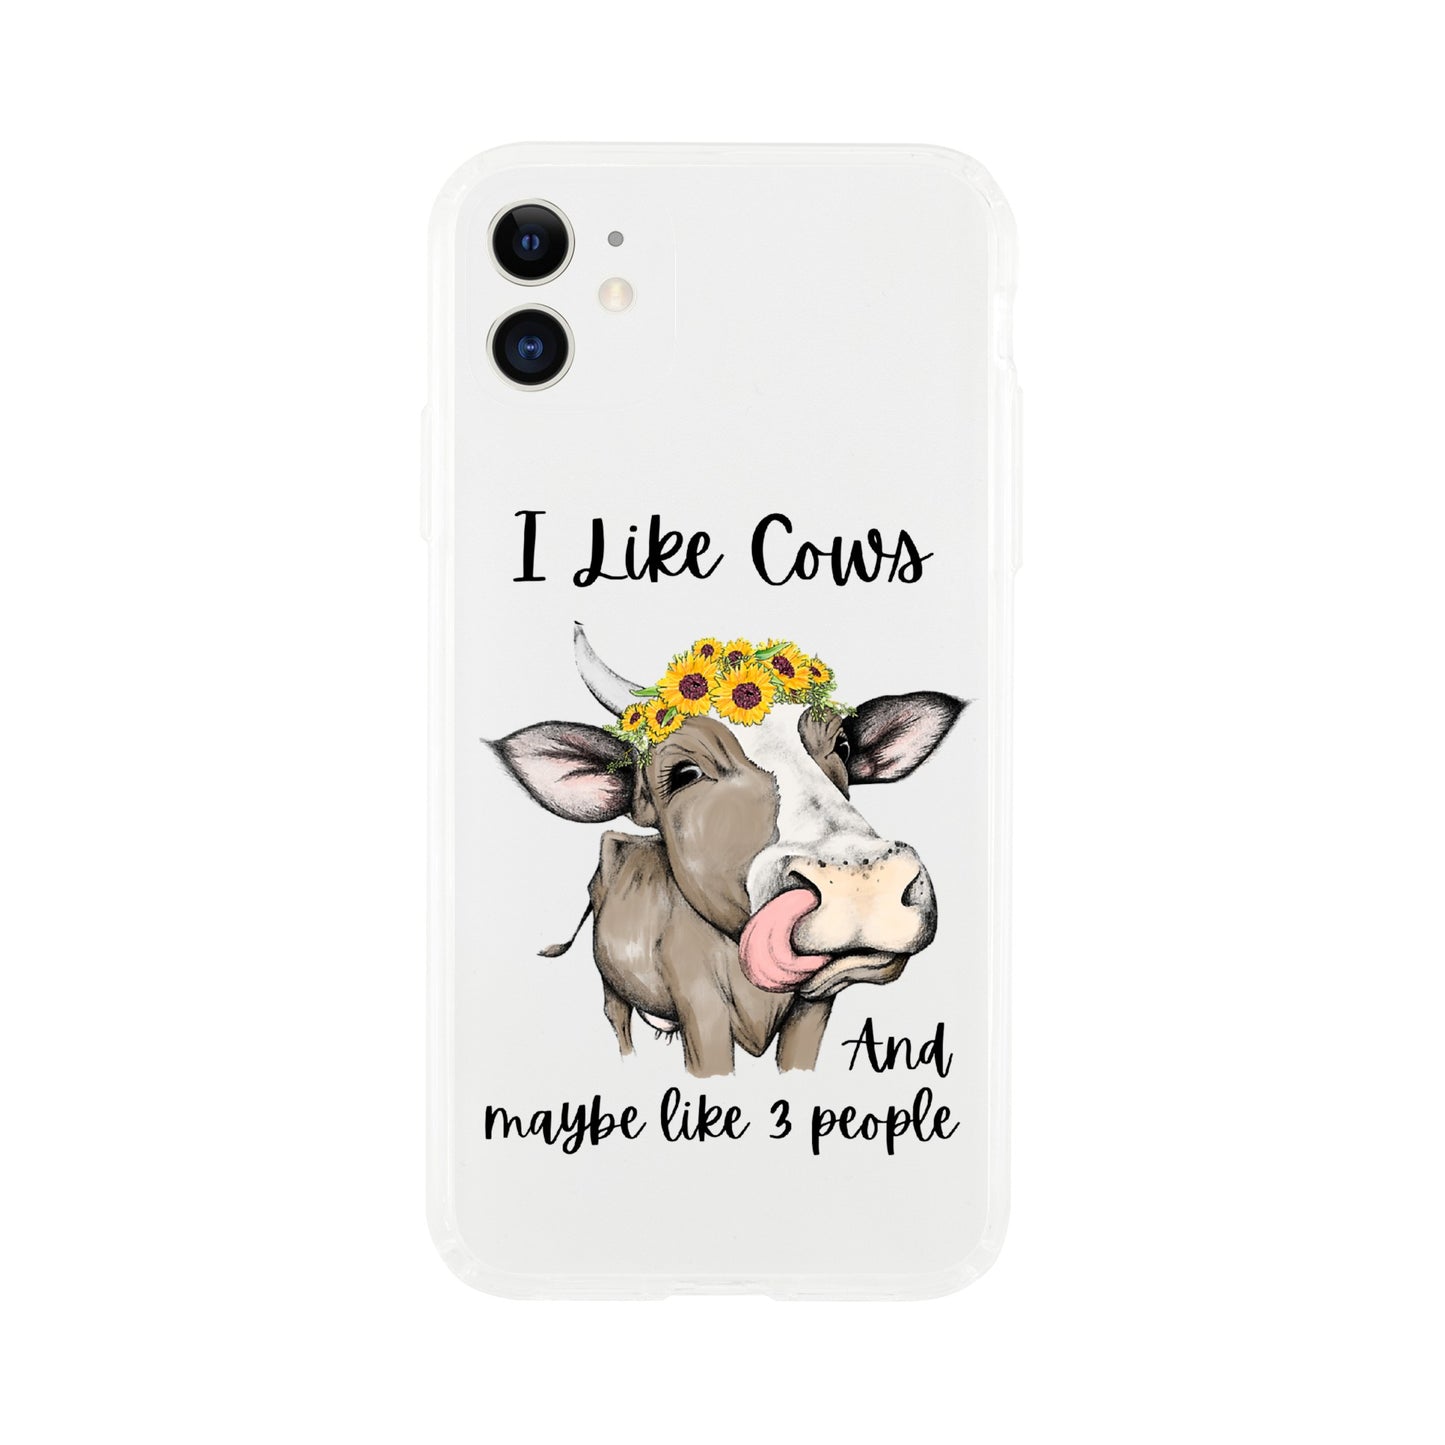 I Like Cows - Clear case